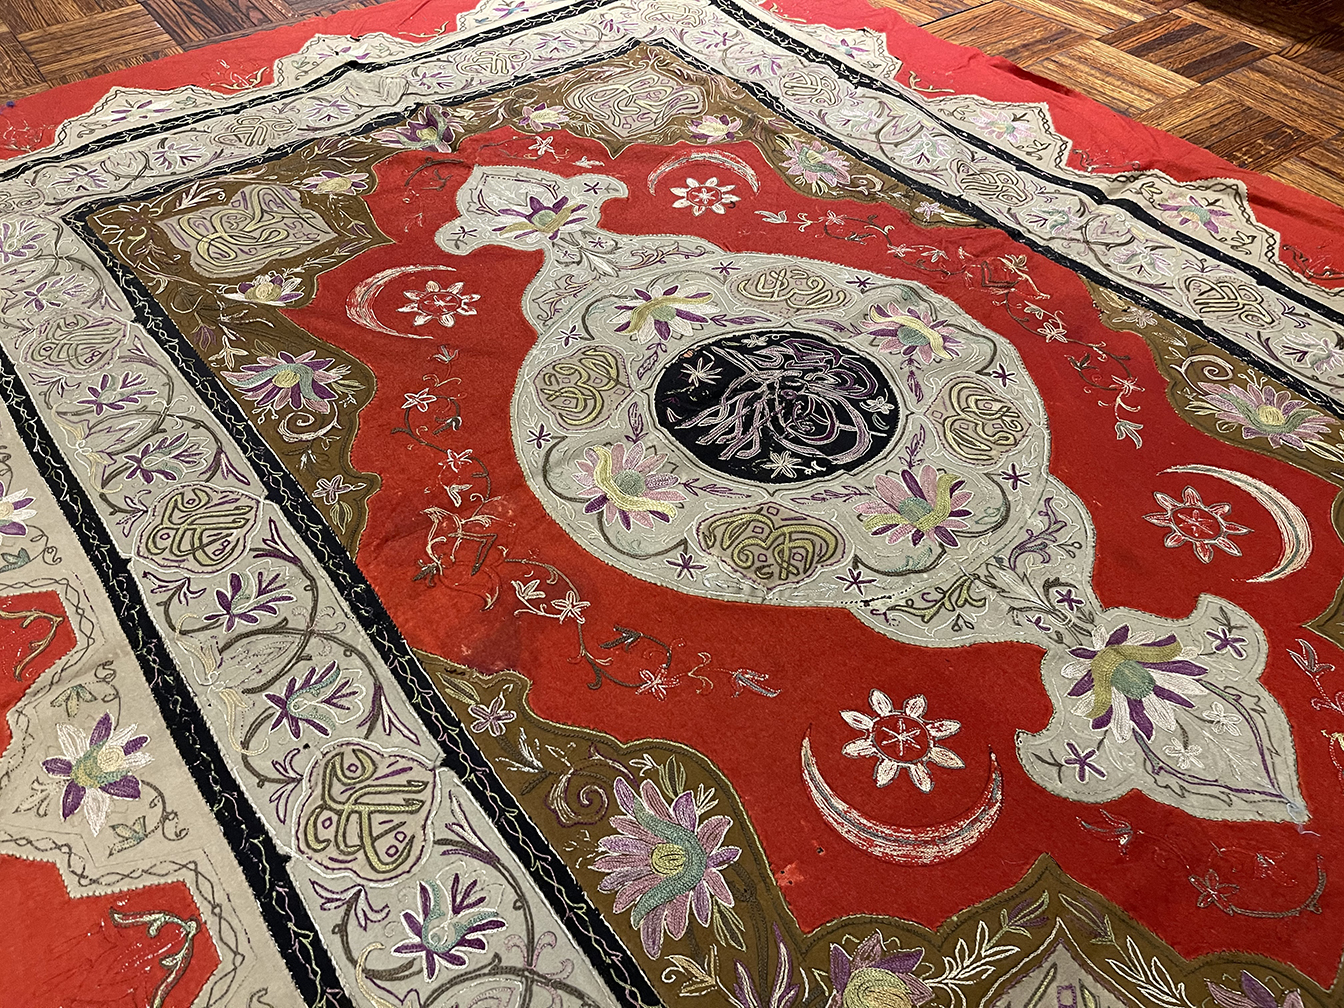 Antique embroidery Rug - # 55910